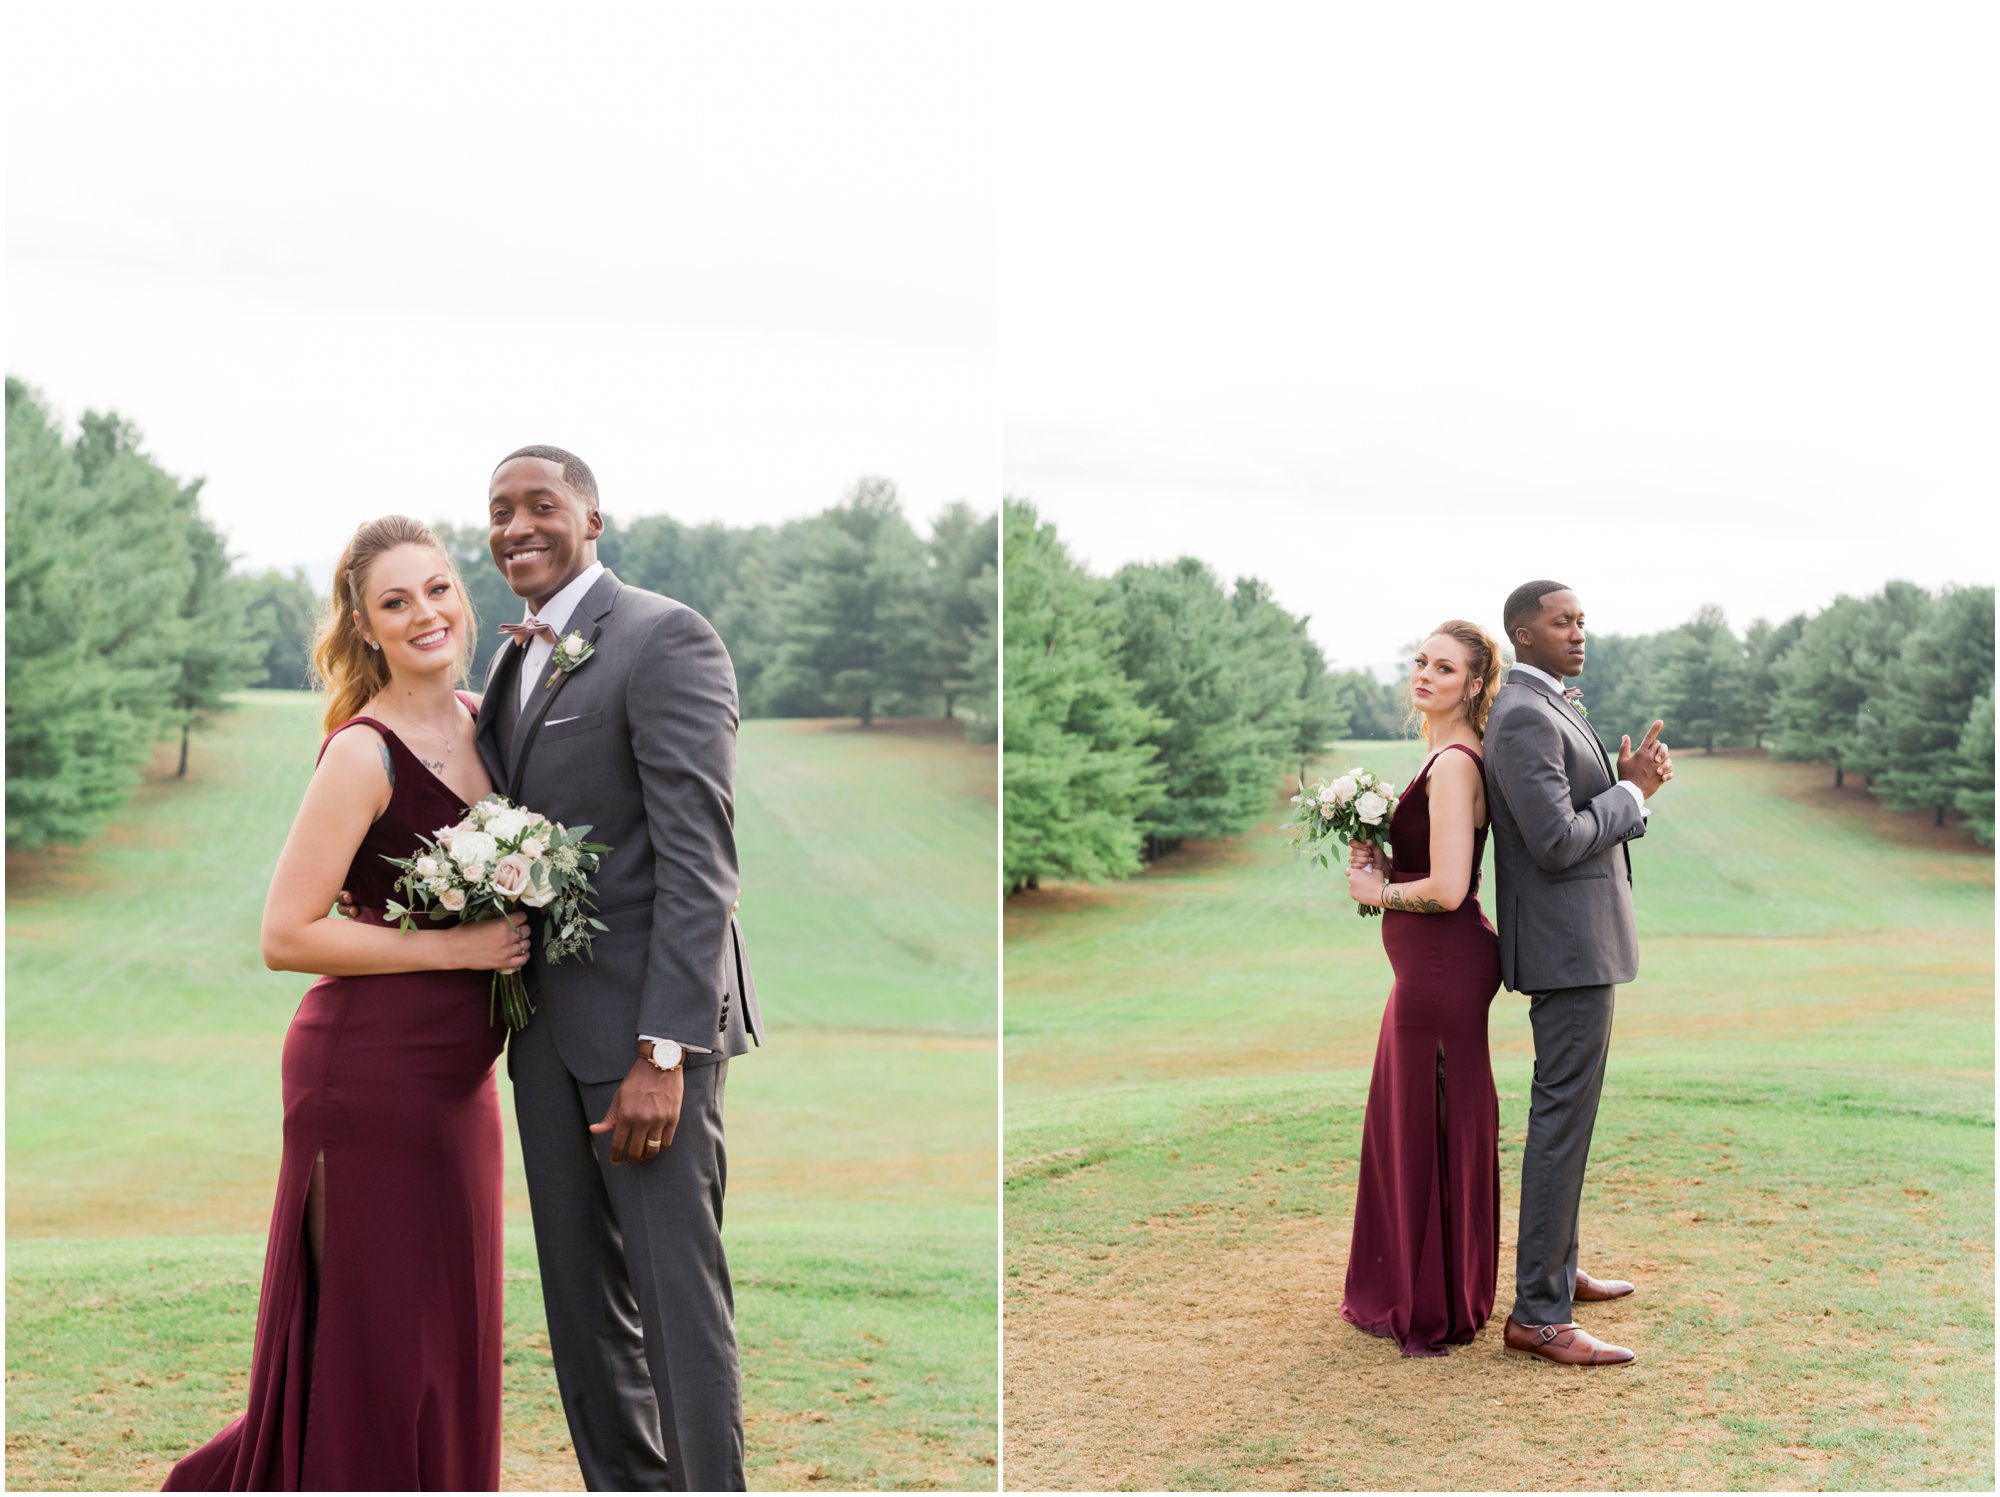 Aireannah & Marquis Bowling Green Country Club Front Royal Franzi Lee Photography-3325.jpg